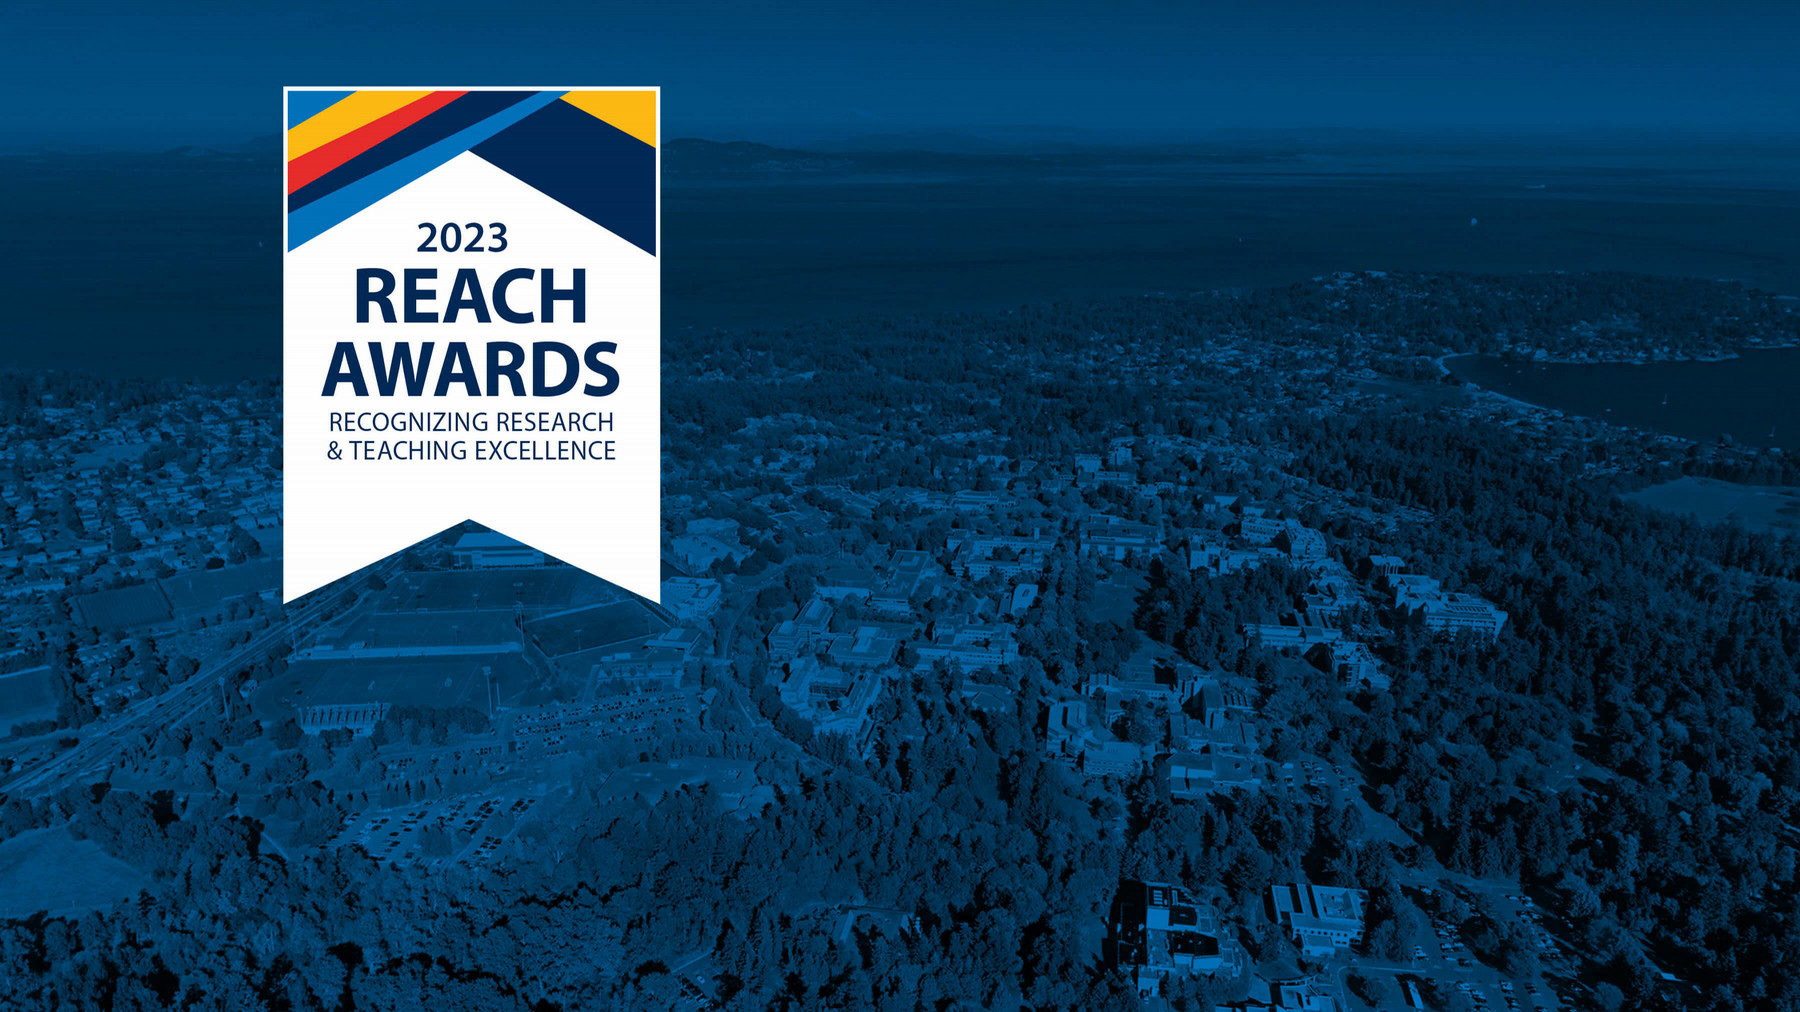 Ribbon image of the Reach awards in white against a blue background.